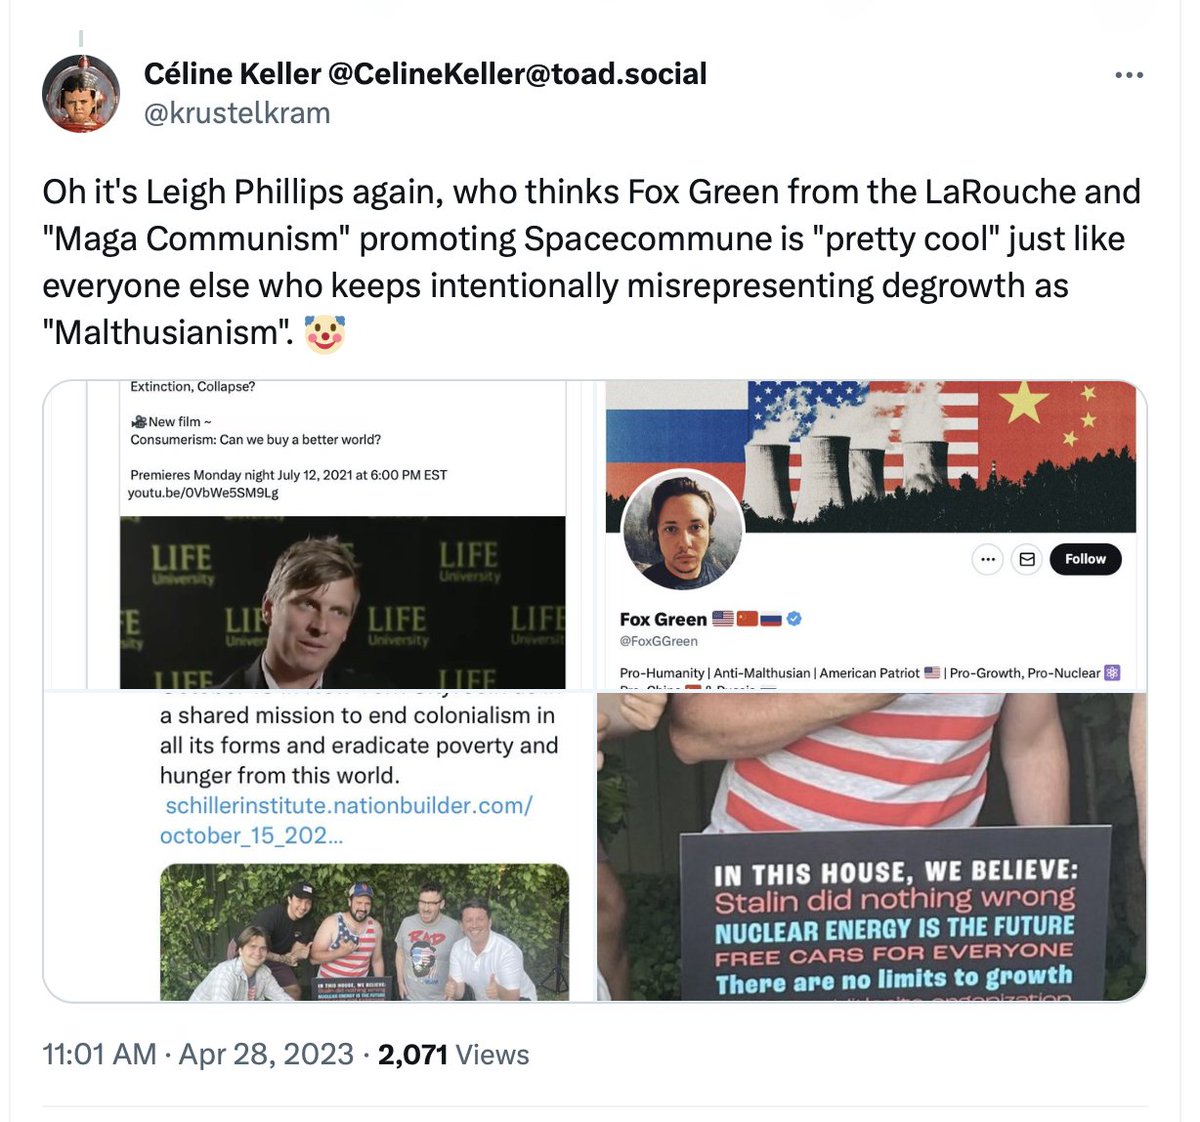 Here's Matt Huber + Leigh Phillips celebrating 'socialist' Holly Jean Buck 4 claiming the climate movement is helping fossils by opposing CCS + some people worse than the ecomodernist 'endless growth' cult they also think are cool: the LaRouche Spacecommune MAGA communists ...